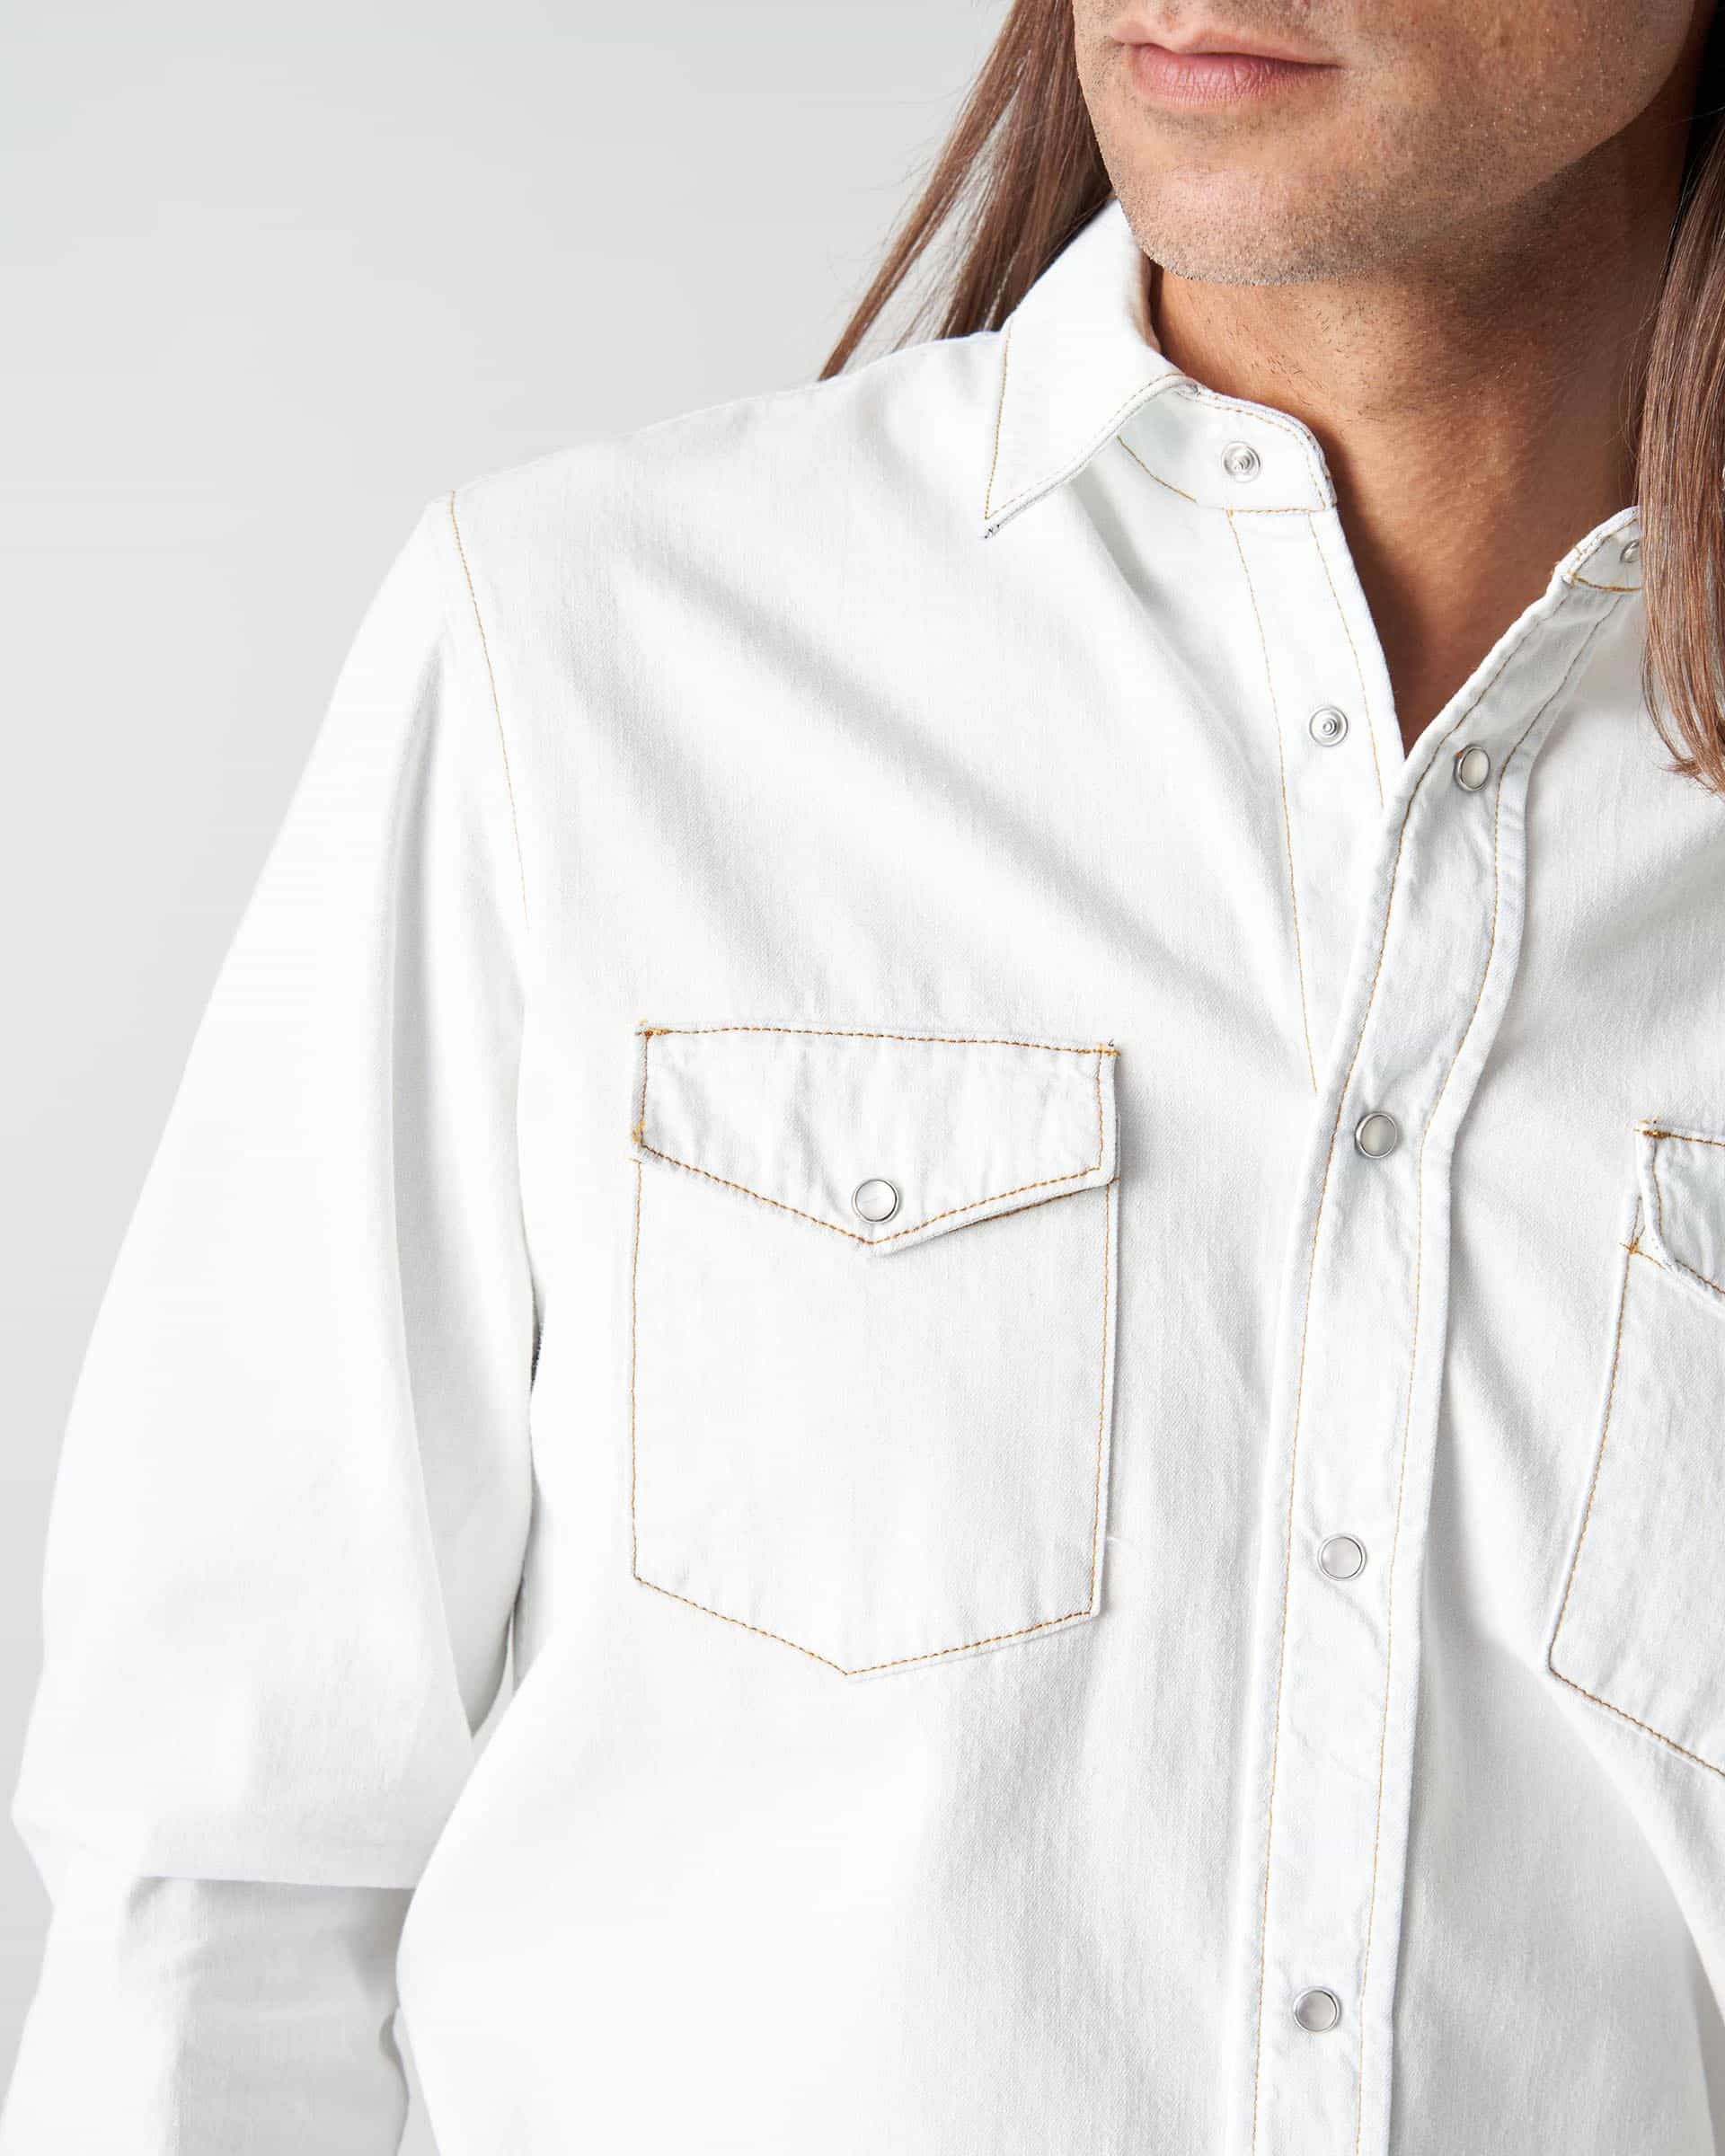 The Market Store | Texan Style Shirt